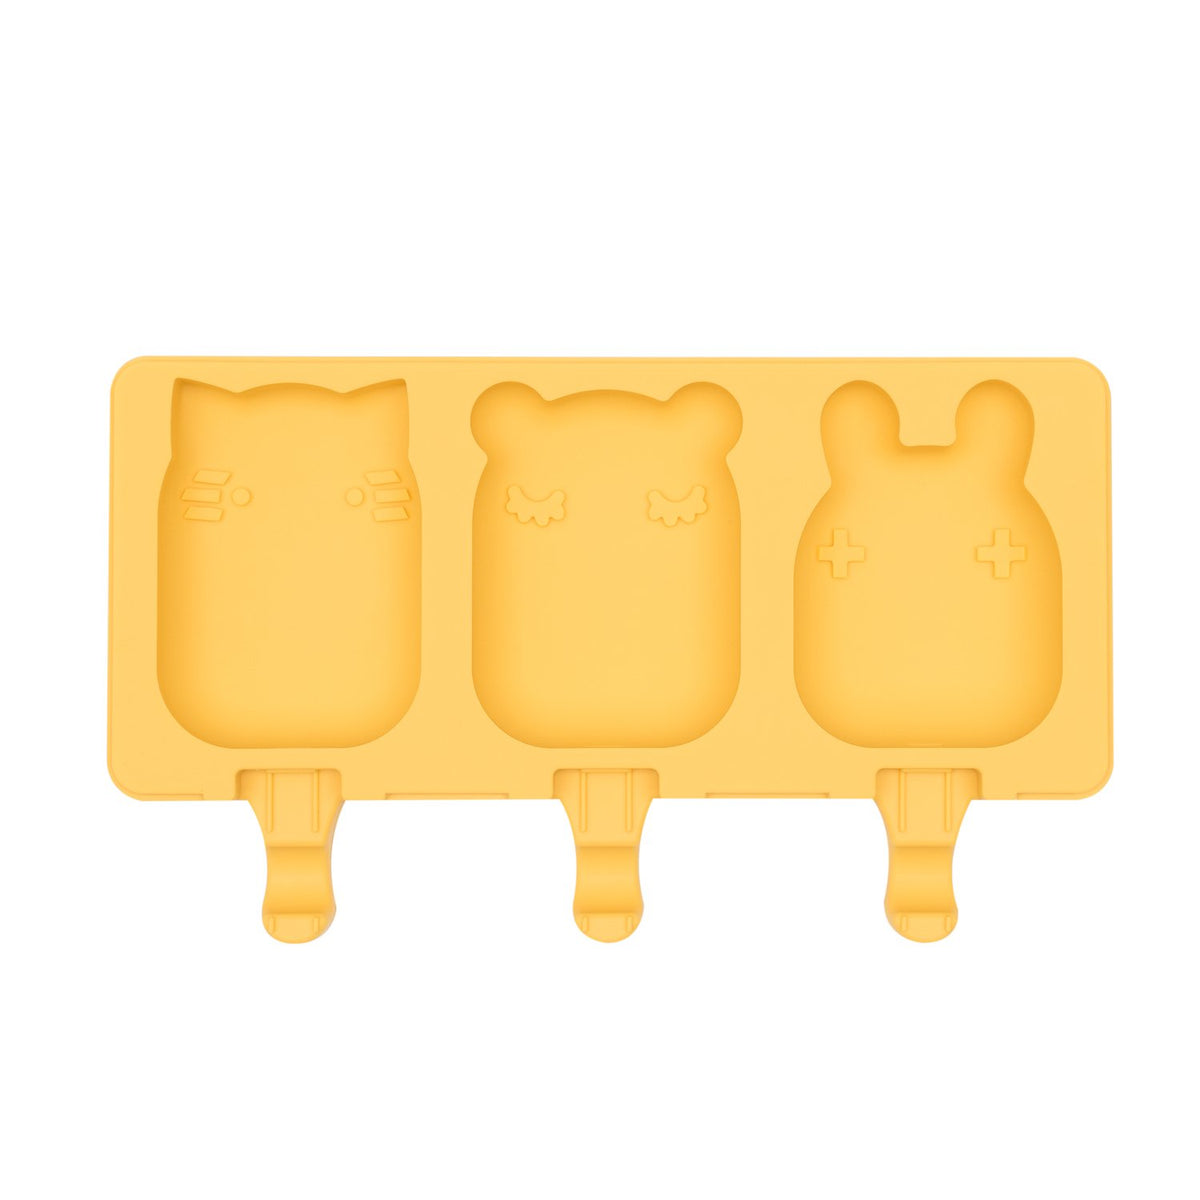 Ice Lolly Pop Mold Popsicle Maker with Straw Makes BPA Free Just Pop In The  Freezer for a Healthy Snack